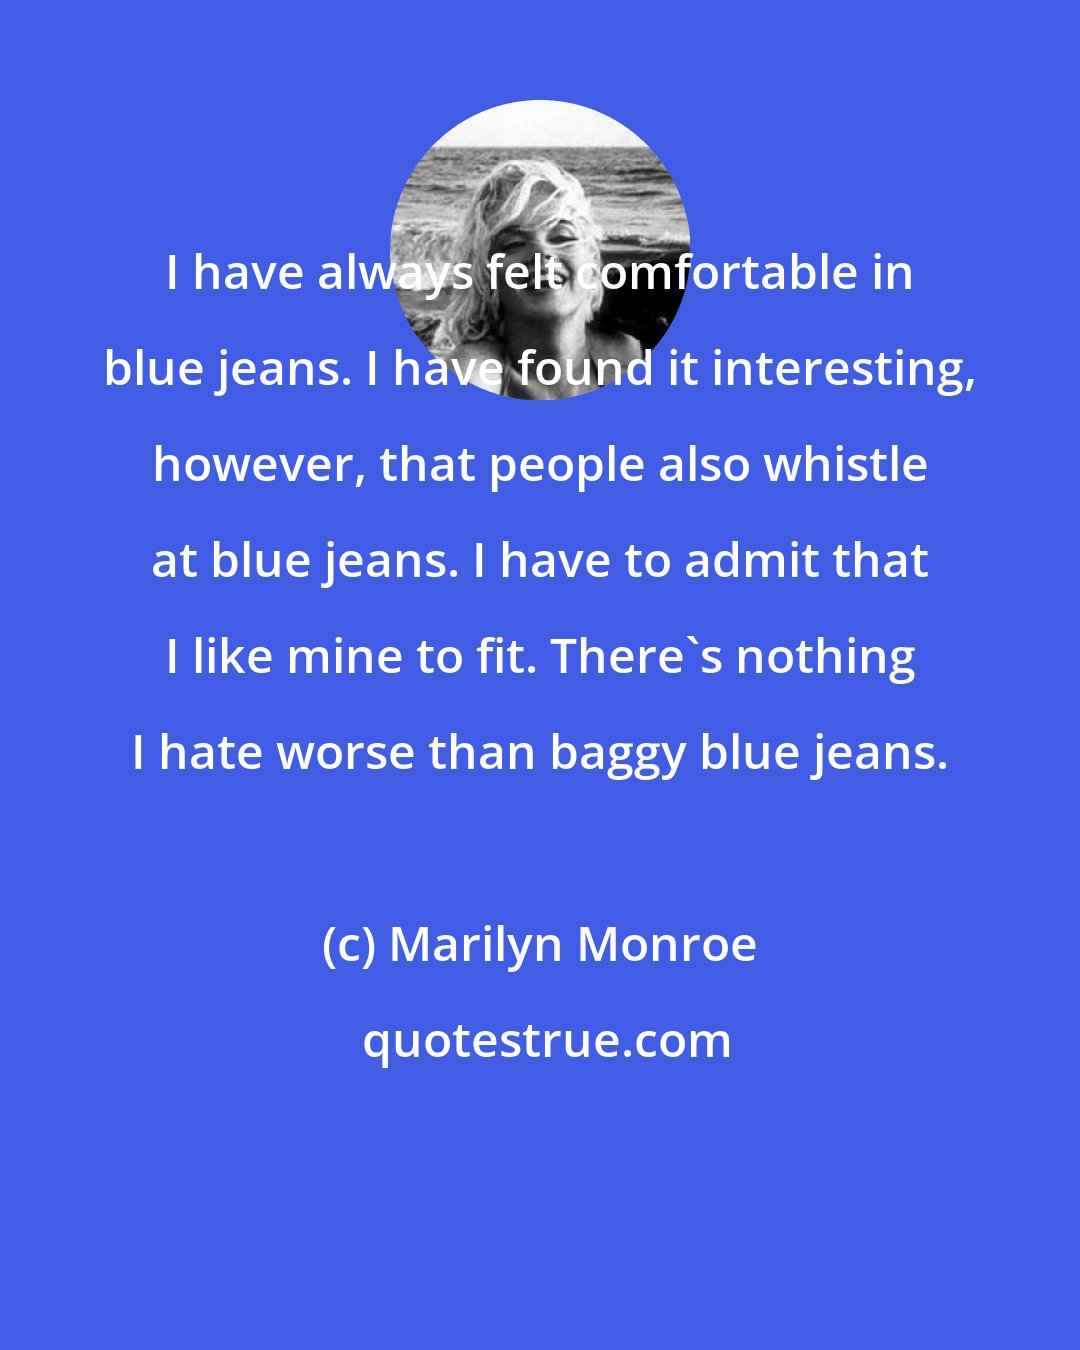 Marilyn Monroe: I have always felt comfortable in blue jeans. I have found it interesting, however, that people also whistle at blue jeans. I have to admit that I like mine to fit. There's nothing I hate worse than baggy blue jeans.